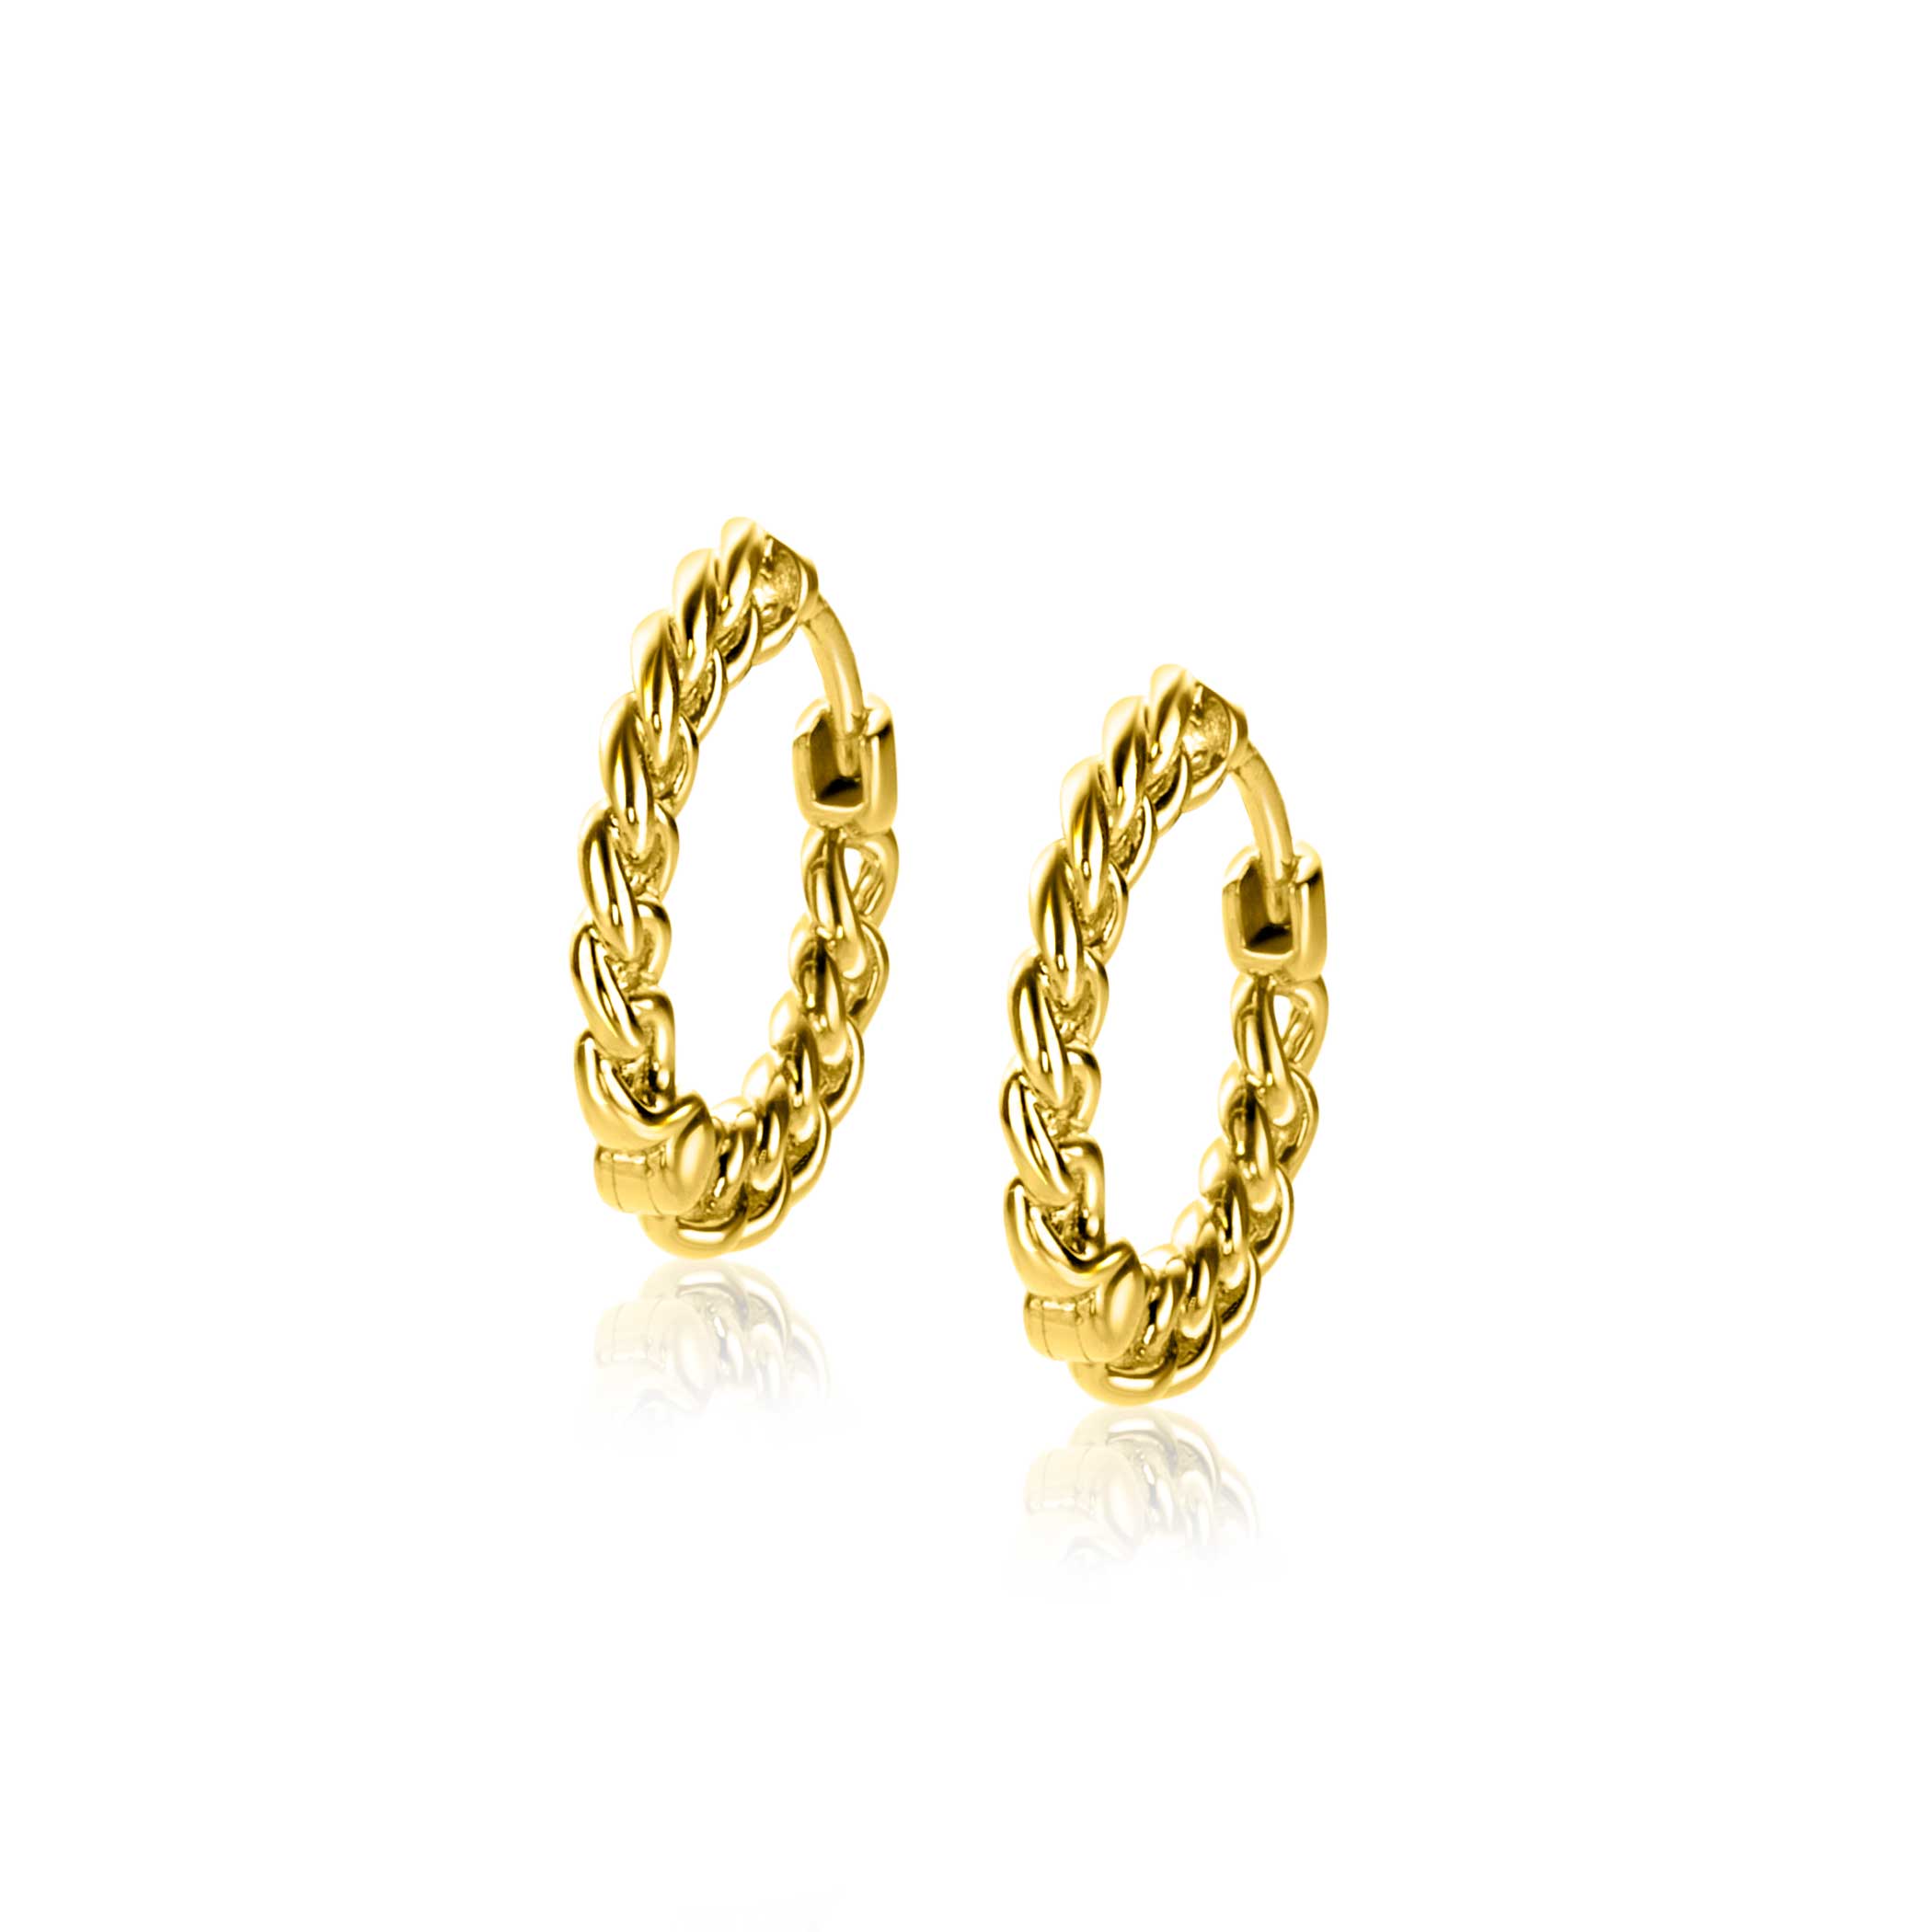 17mm ZINZI Gold Plated Sterling Silver Hoop Earrings Curb Chain from the side width 2mm ZIO1414G